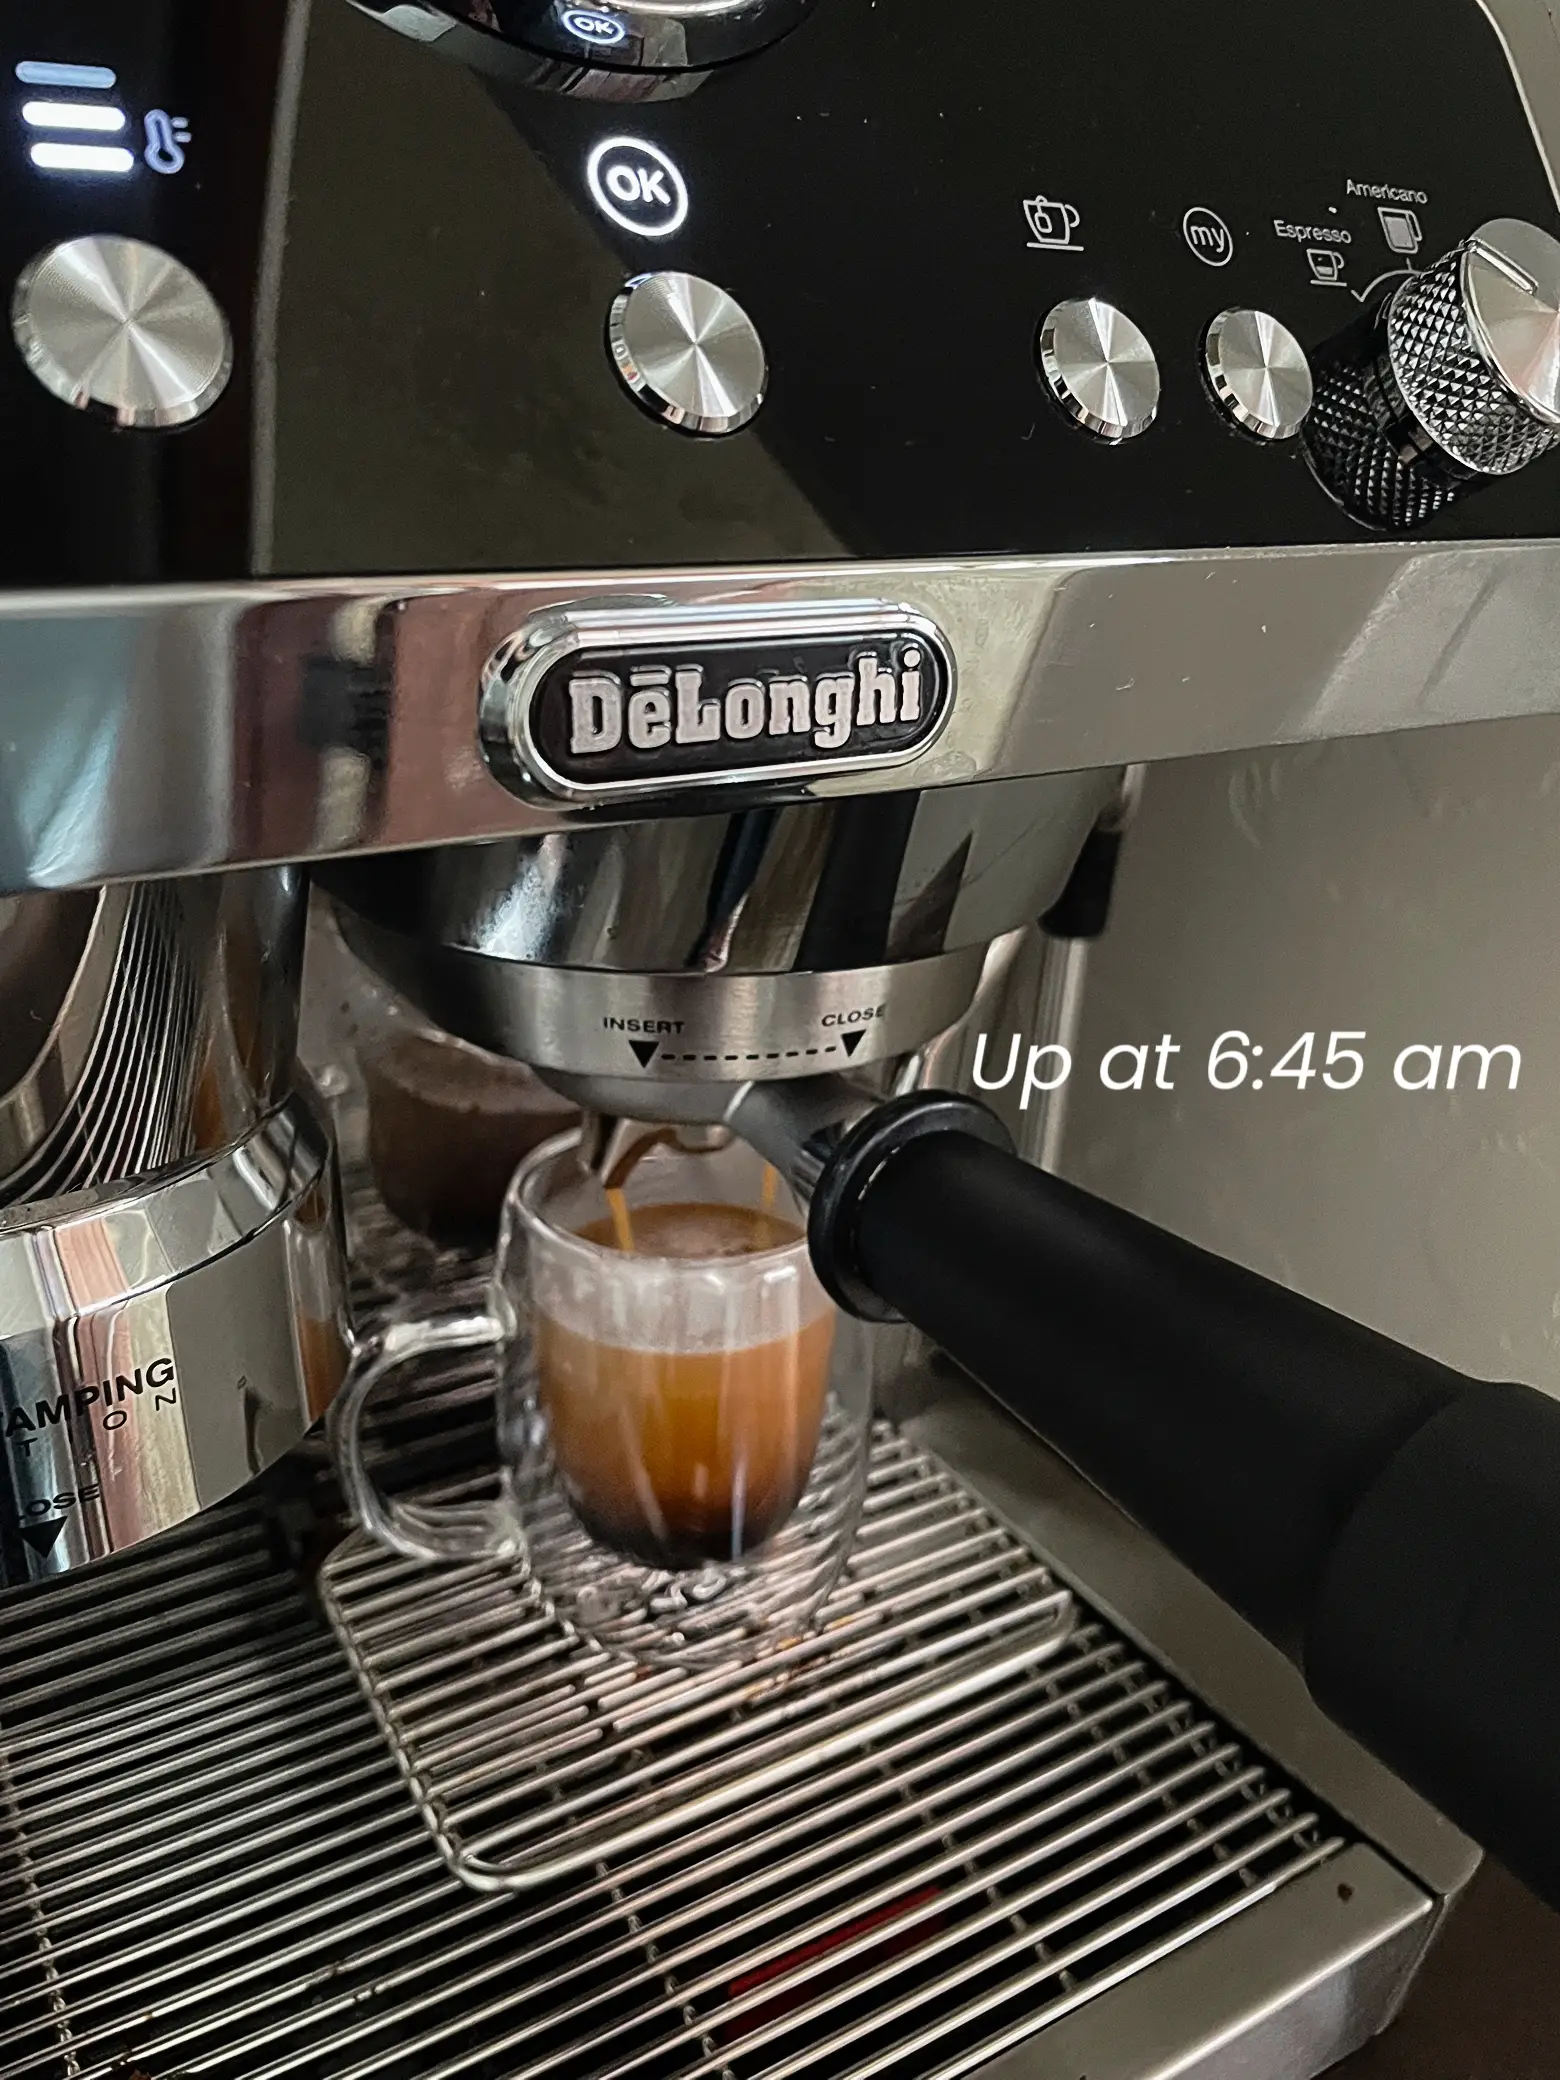 Start your day the Delonghi way! Elevate your morning routine with